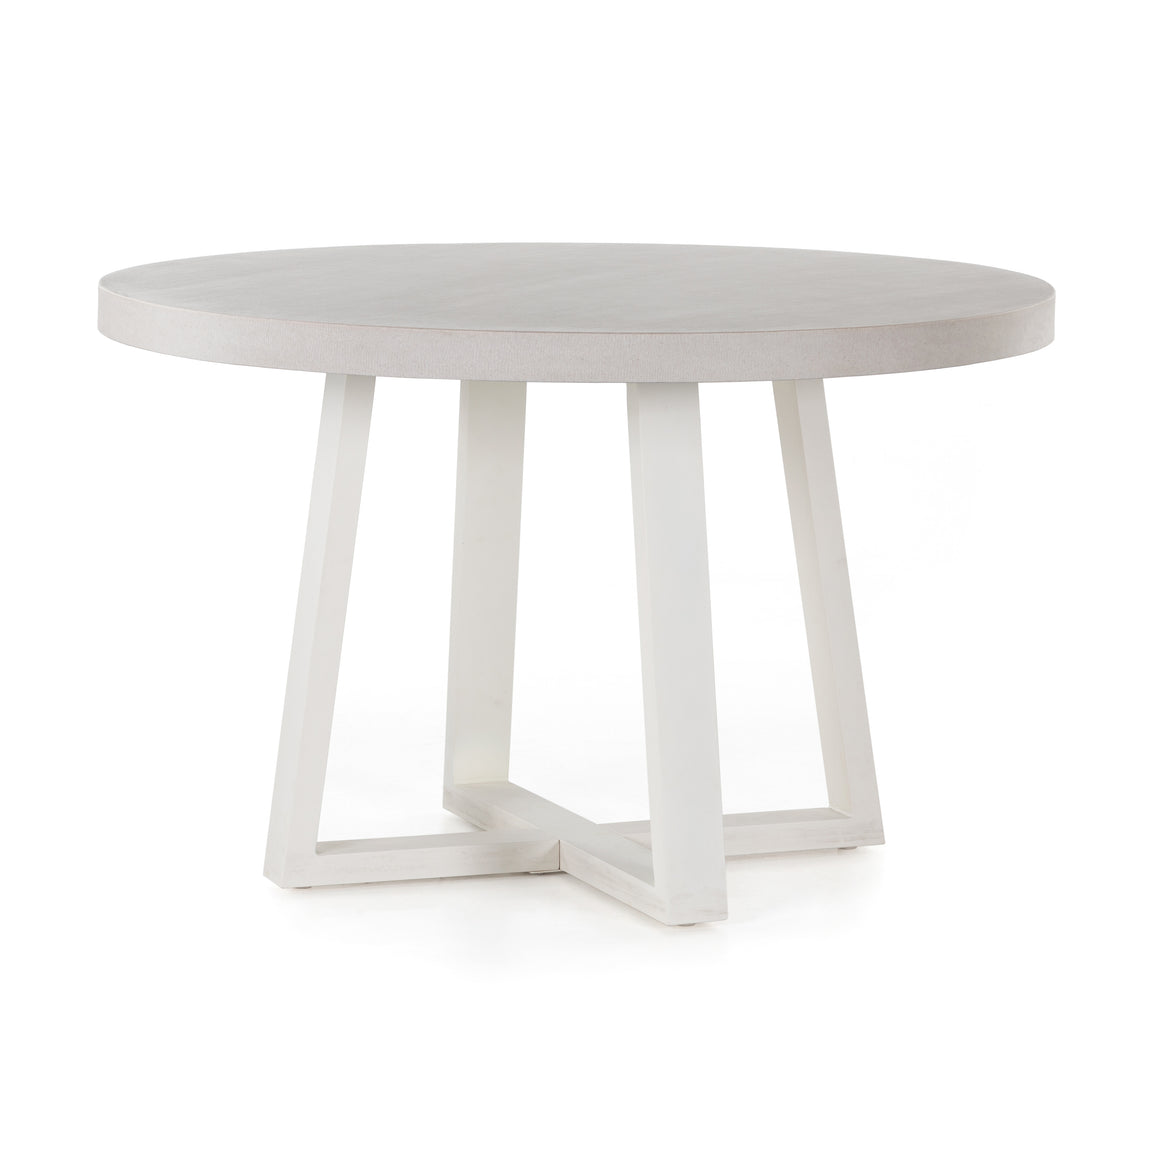 Cyrus Round Outdoor Dining Table - Sand